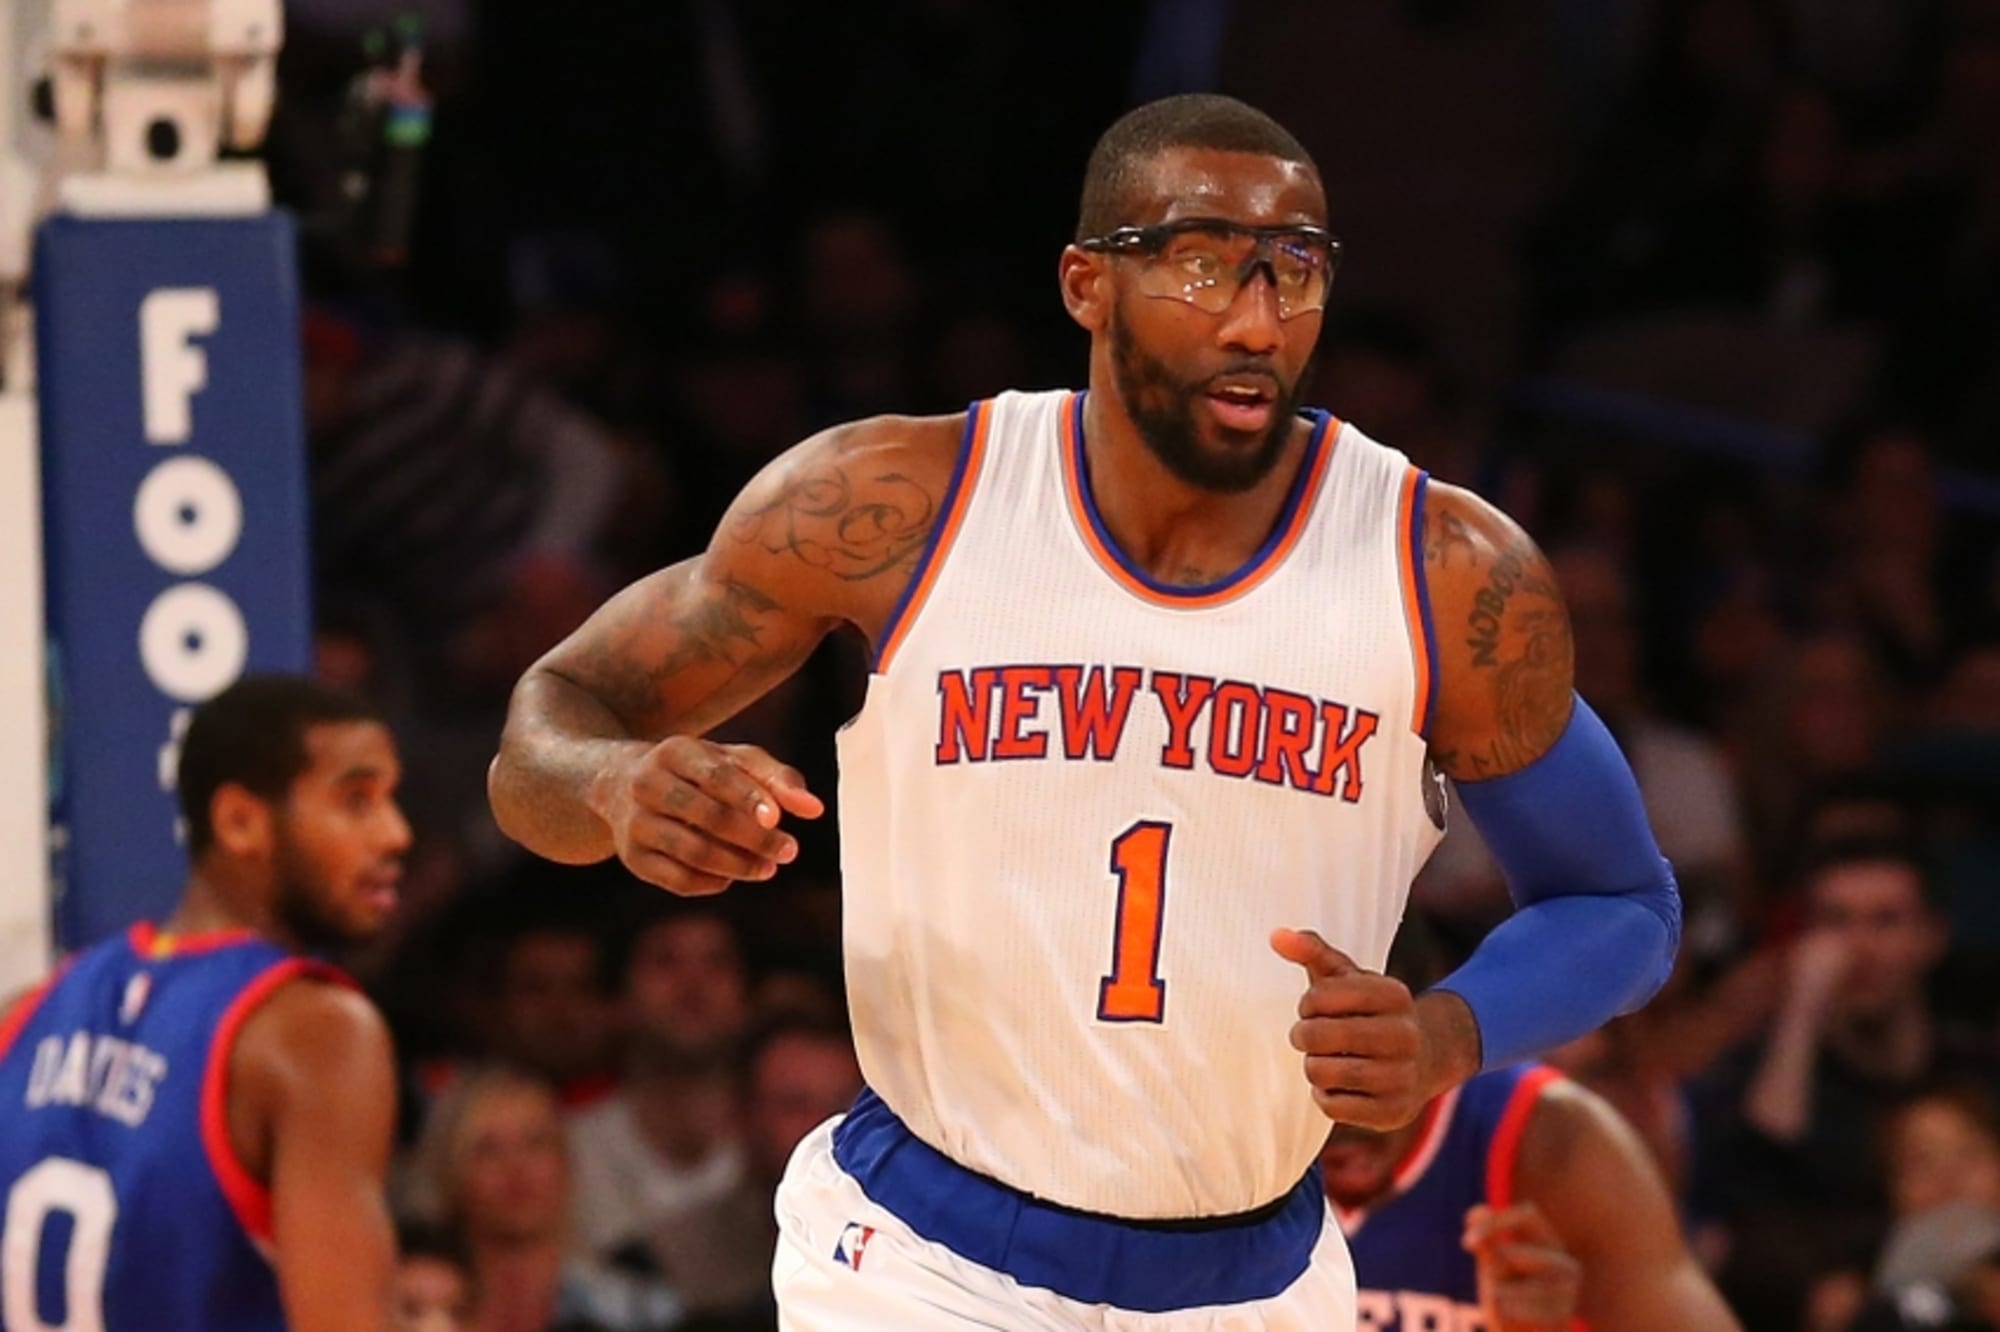 Despite choice to retire as a Knick, Amar'e Stoudemire will always